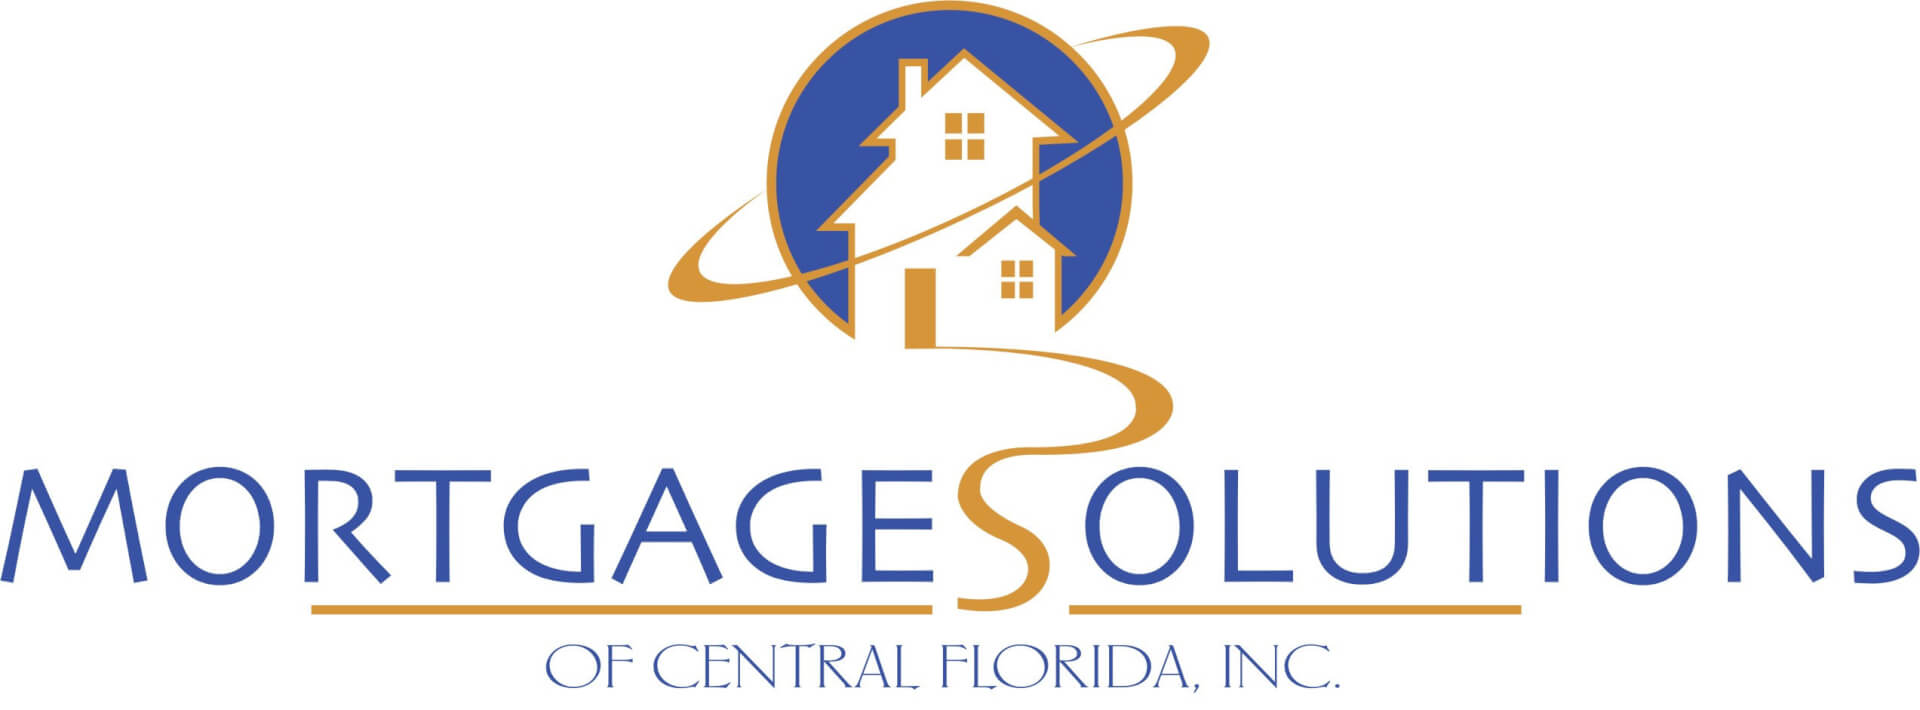 Mortgage Solutions of Central Florida, Inc.